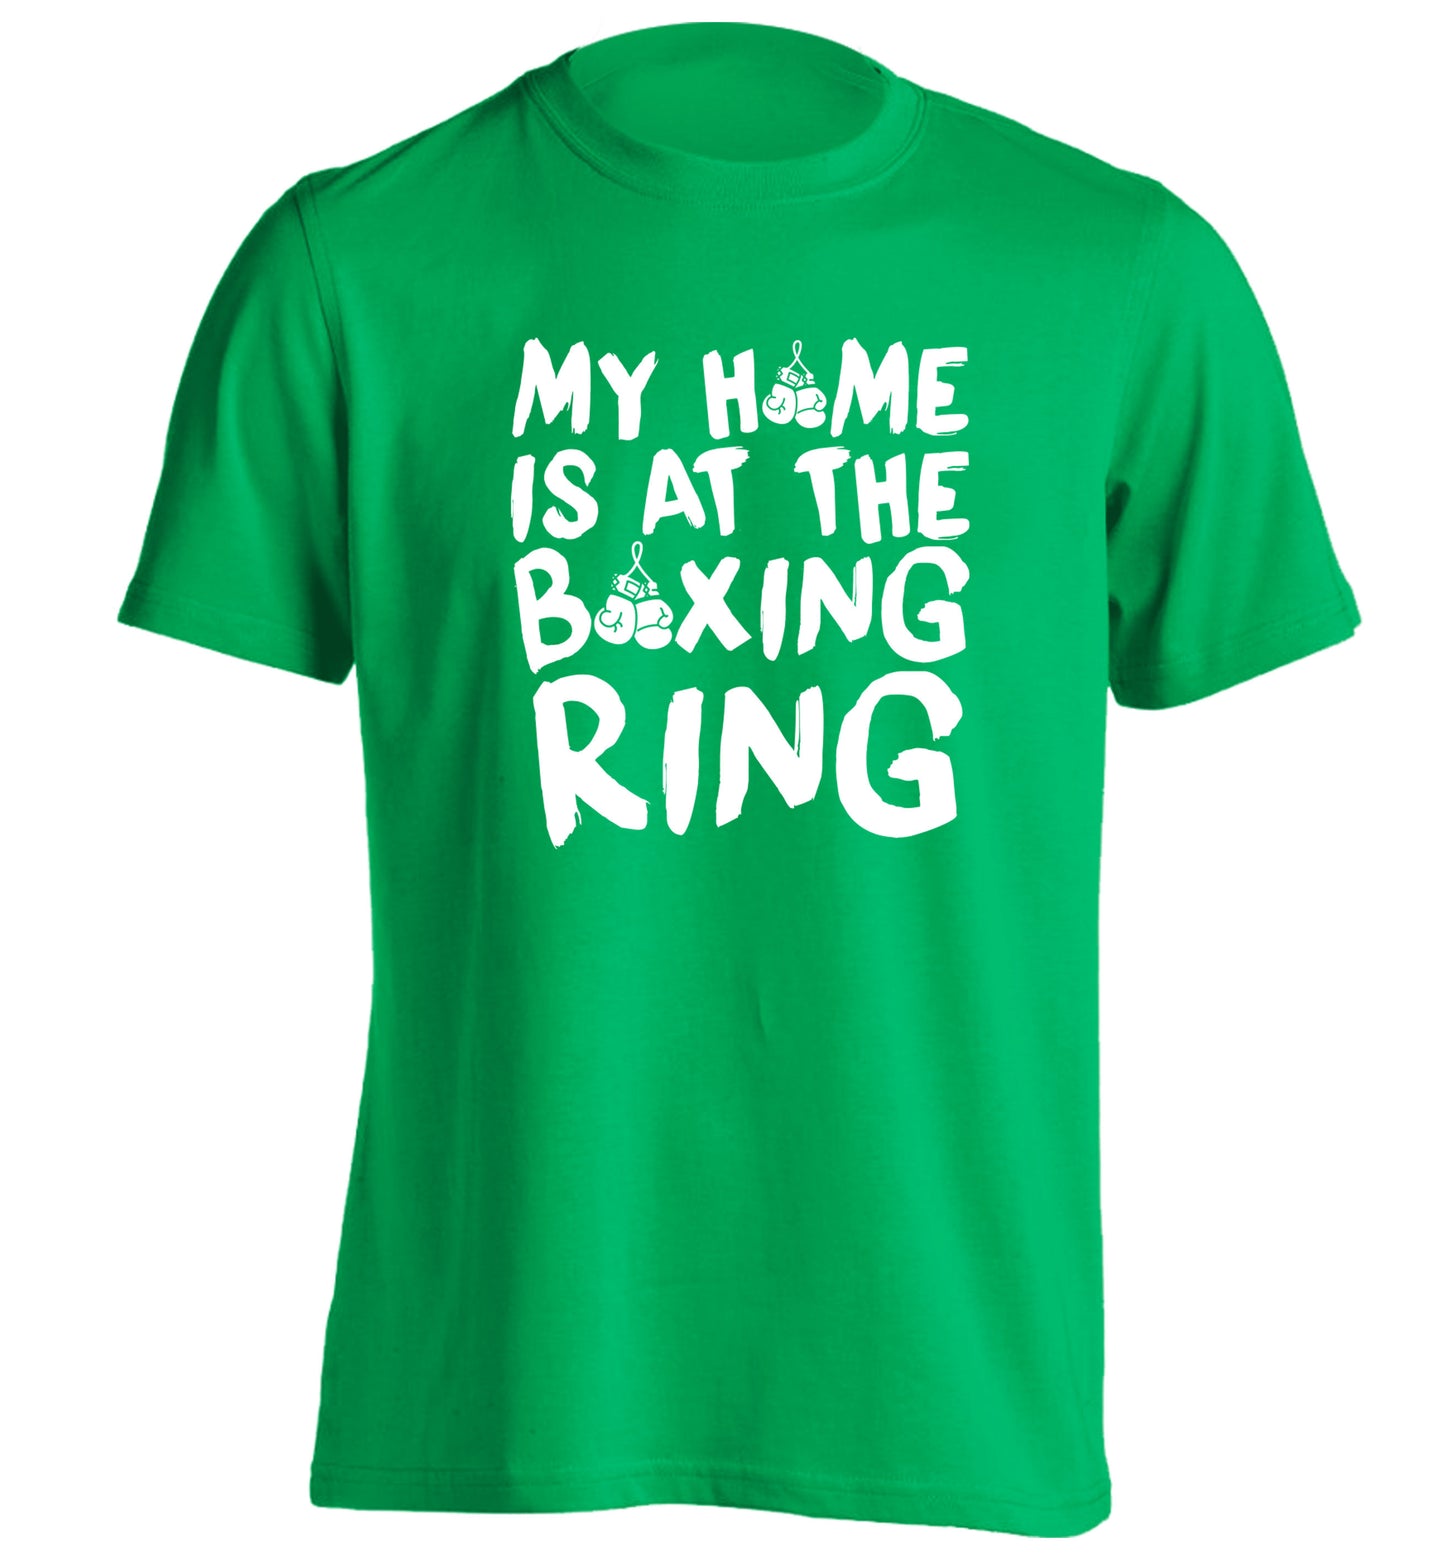 My home is at the boxing ring adults unisex green Tshirt 2XL